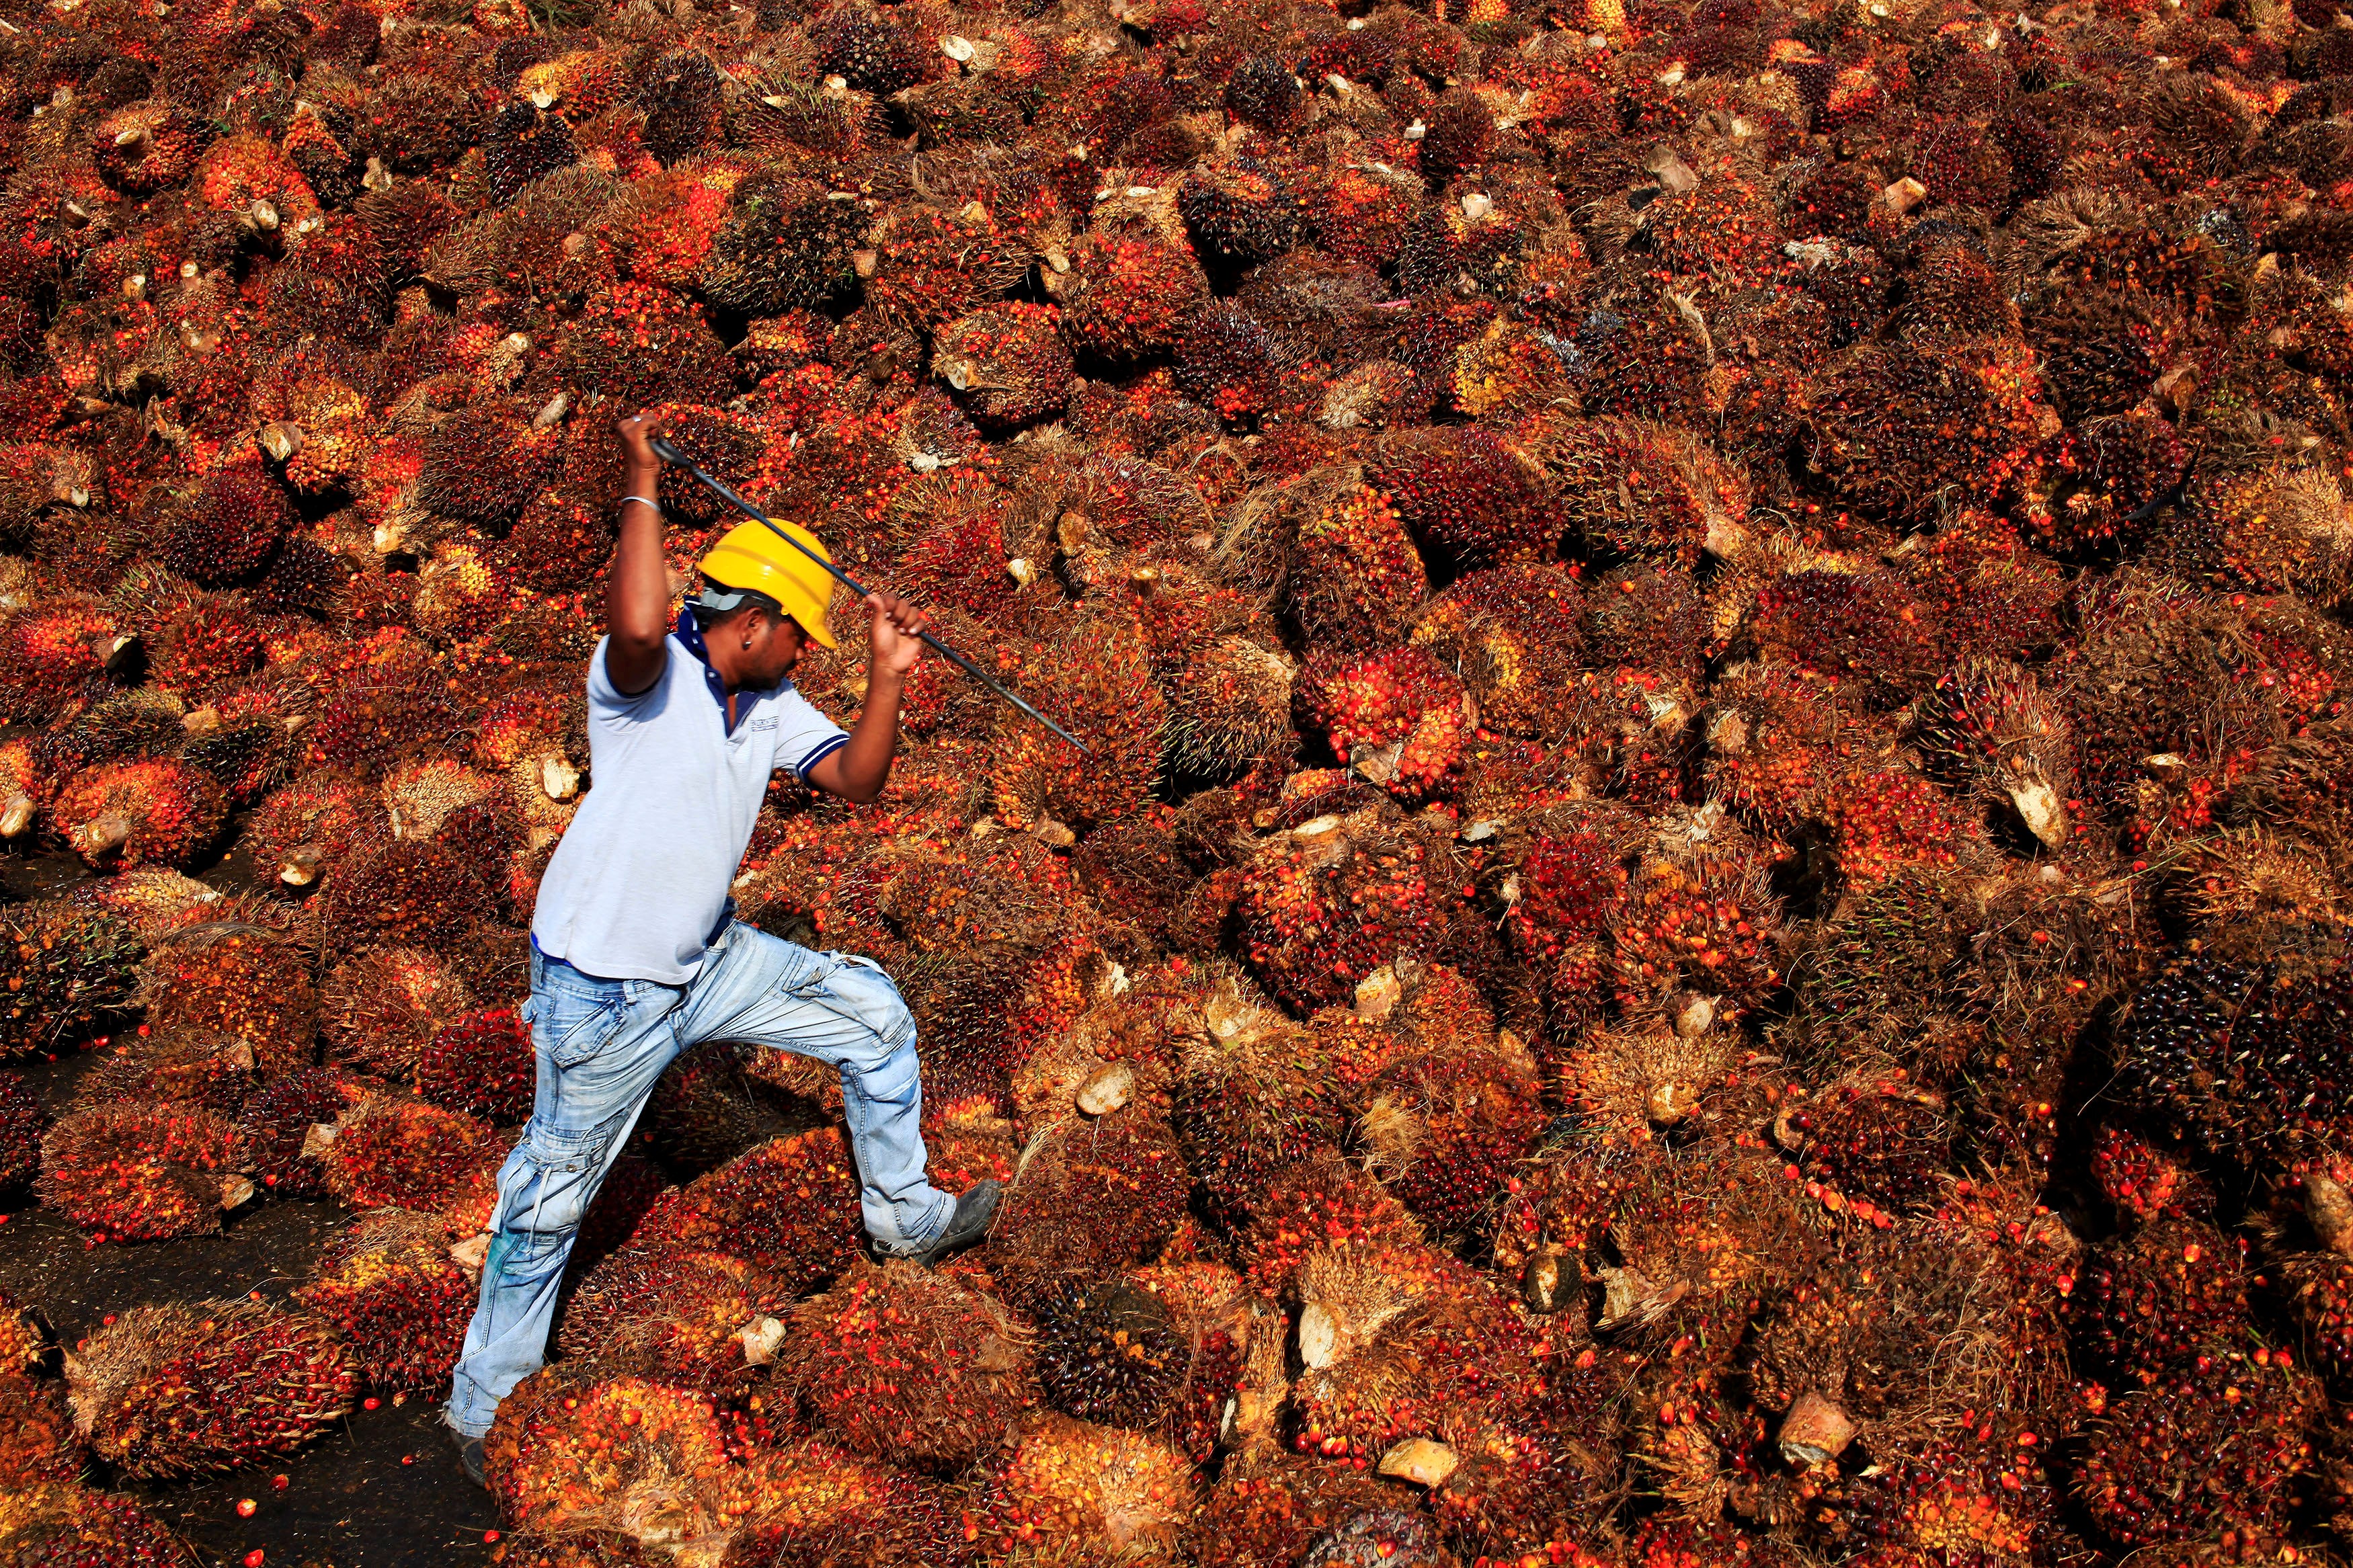 With Southeast Asian economies in the balance – especially Indonesia and Malaysia – the fruit producers must address growing concerns about environmental and employee abuses without losing their competitive edge 